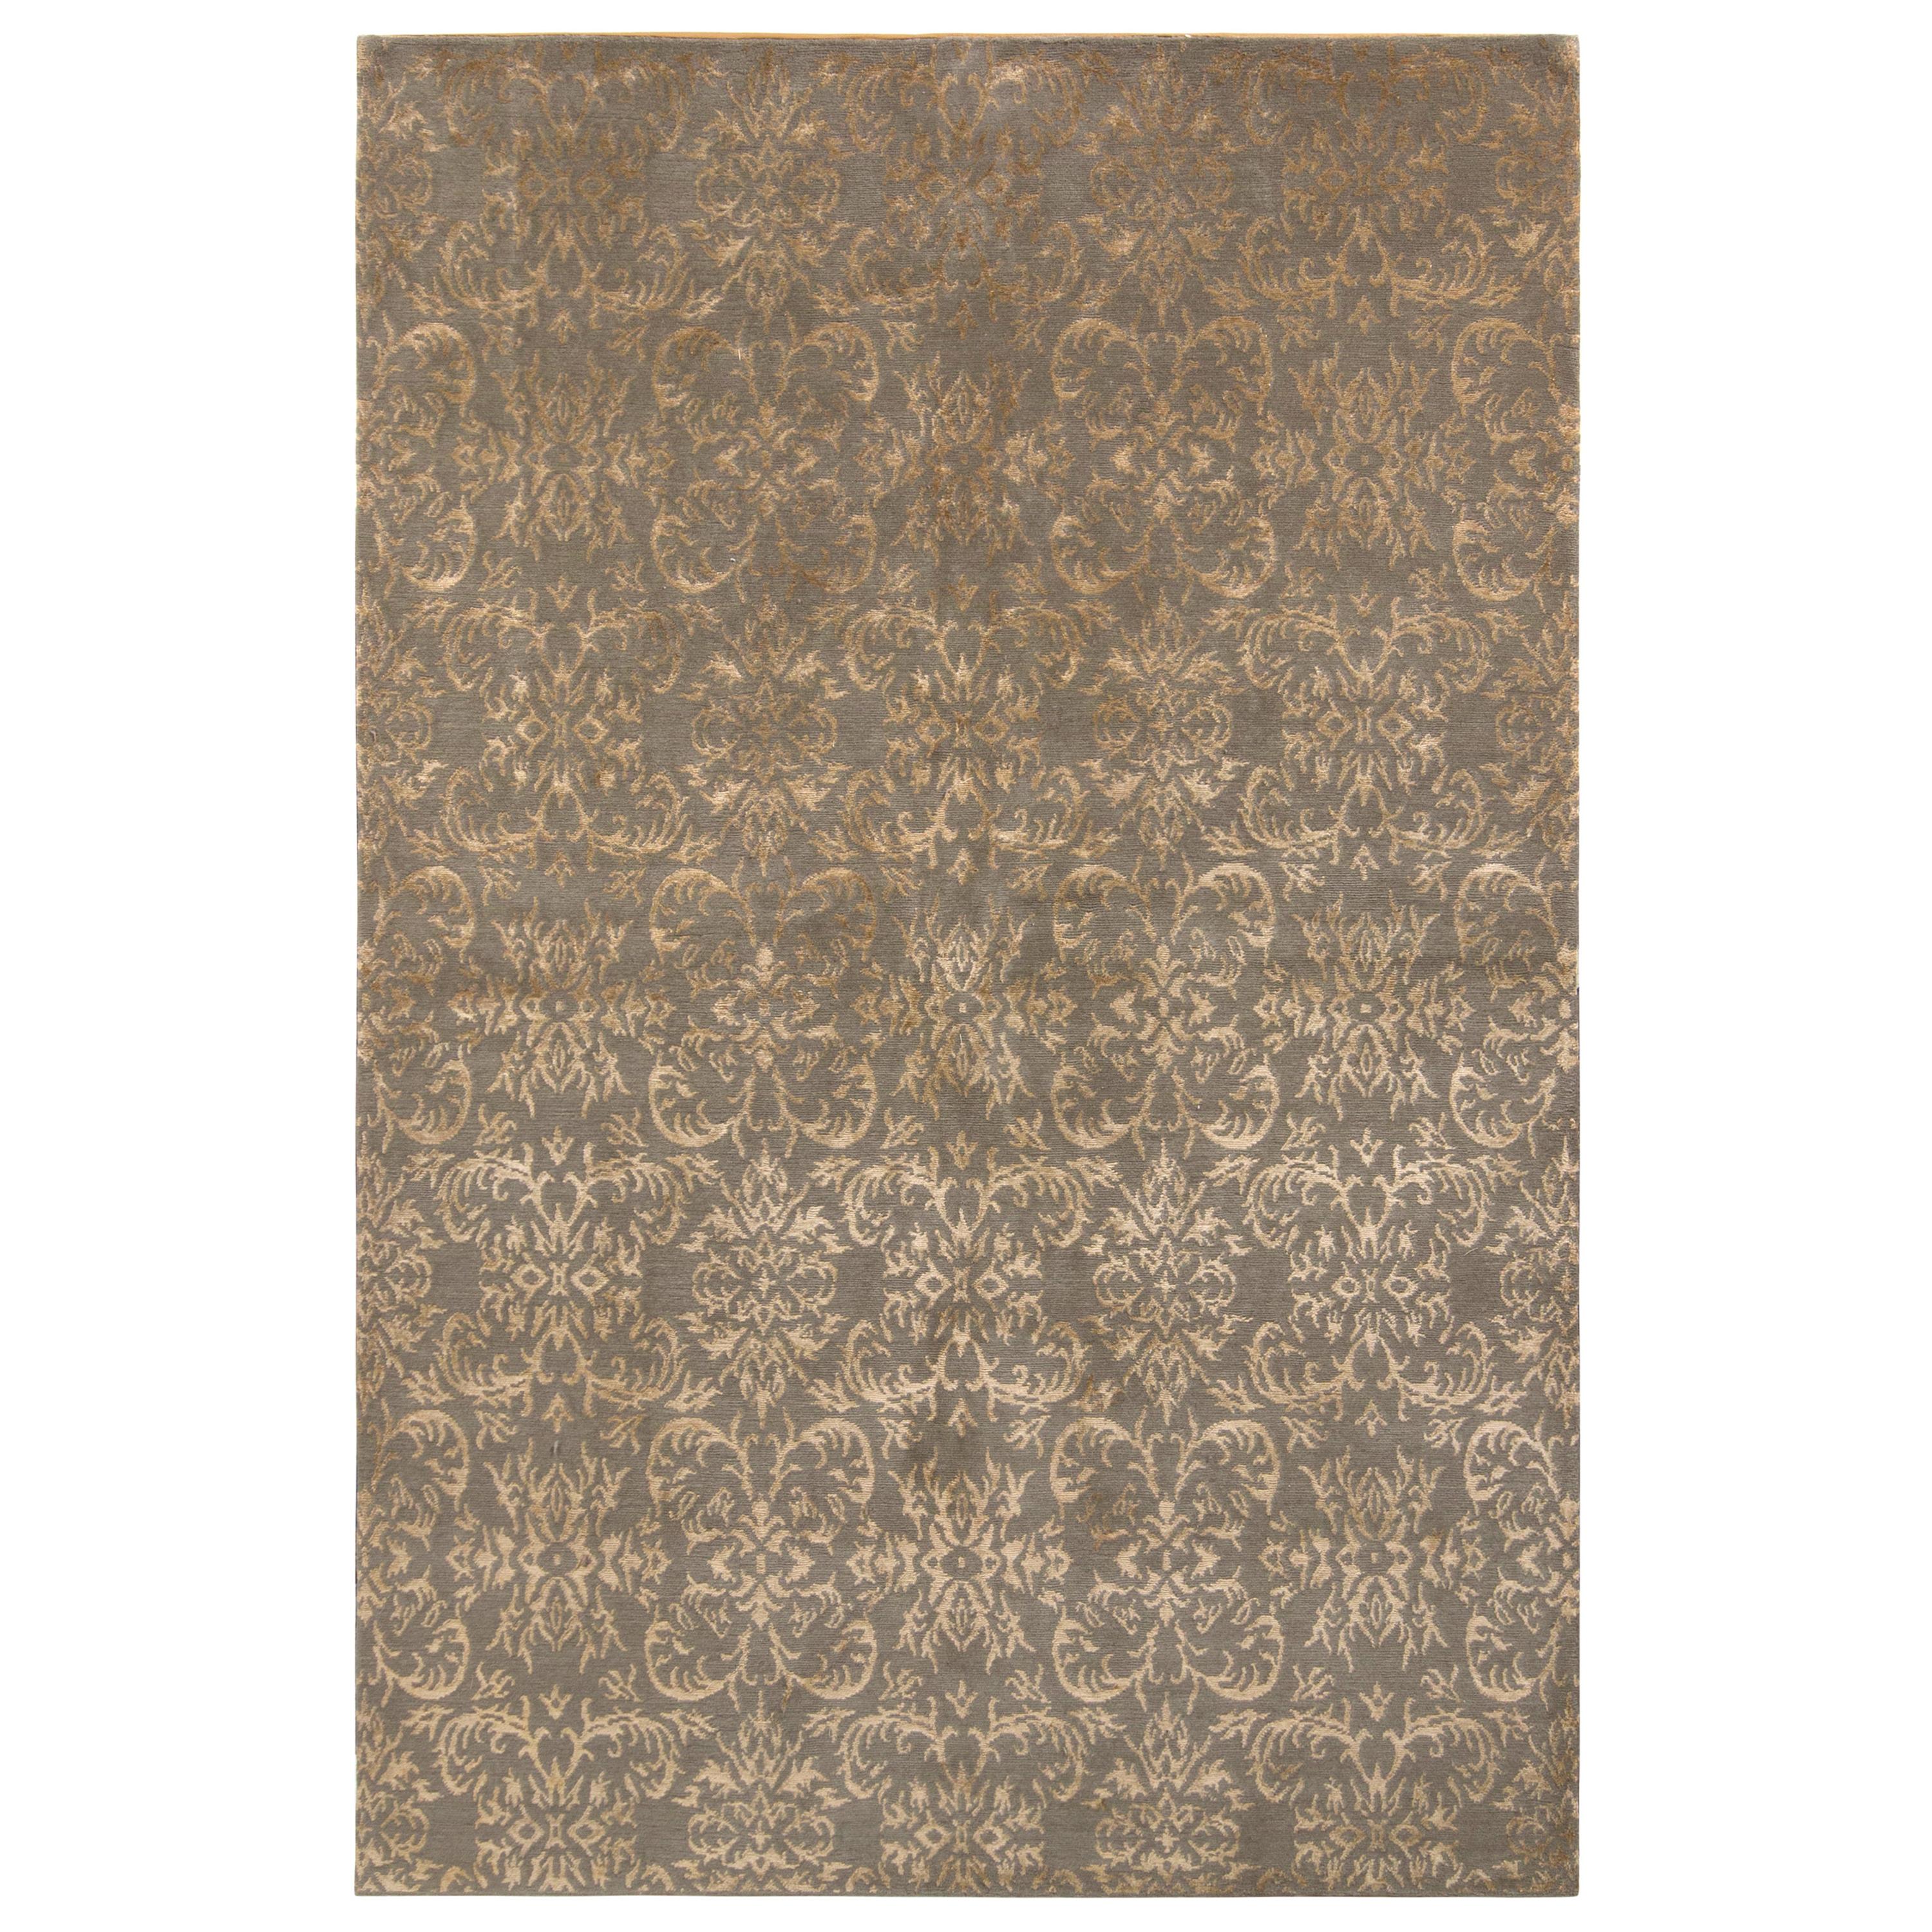 Rug & Kilim’s European Style Rug in Beige-Gold and Green Arabesque Pattern For Sale